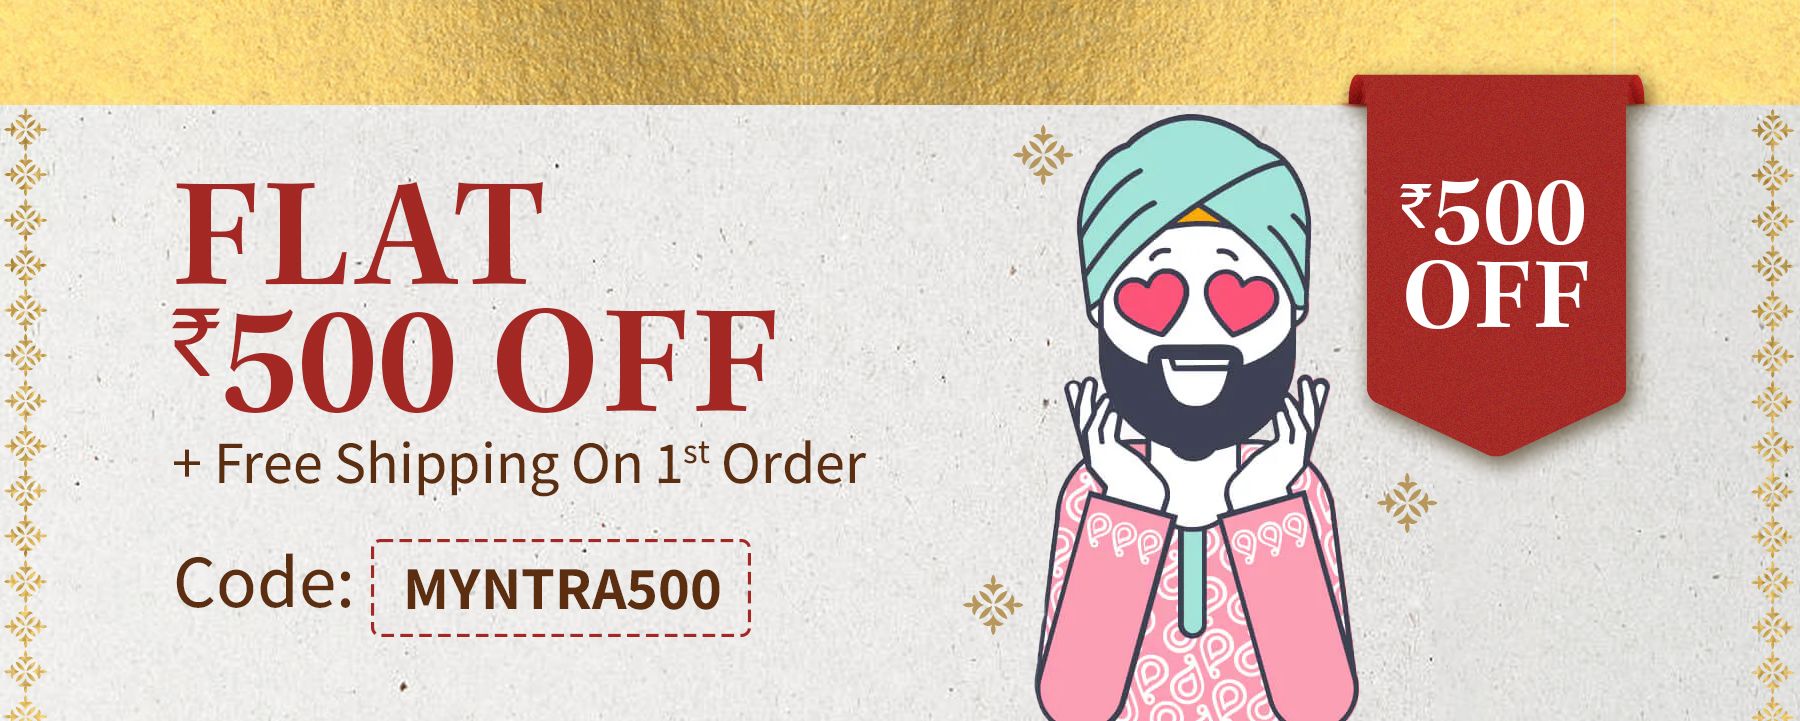 Dollar Bigboss - #Free Handkerchief With Two Pieces Of #DollarBigboss RN  Vest Available @ Your Nearest #RetailOutlet This #Offer is not valid on  e-commerce i.e. online purchase. #Apparel #Scheme #SpecialOffer #FitHaiBoss  Akshay